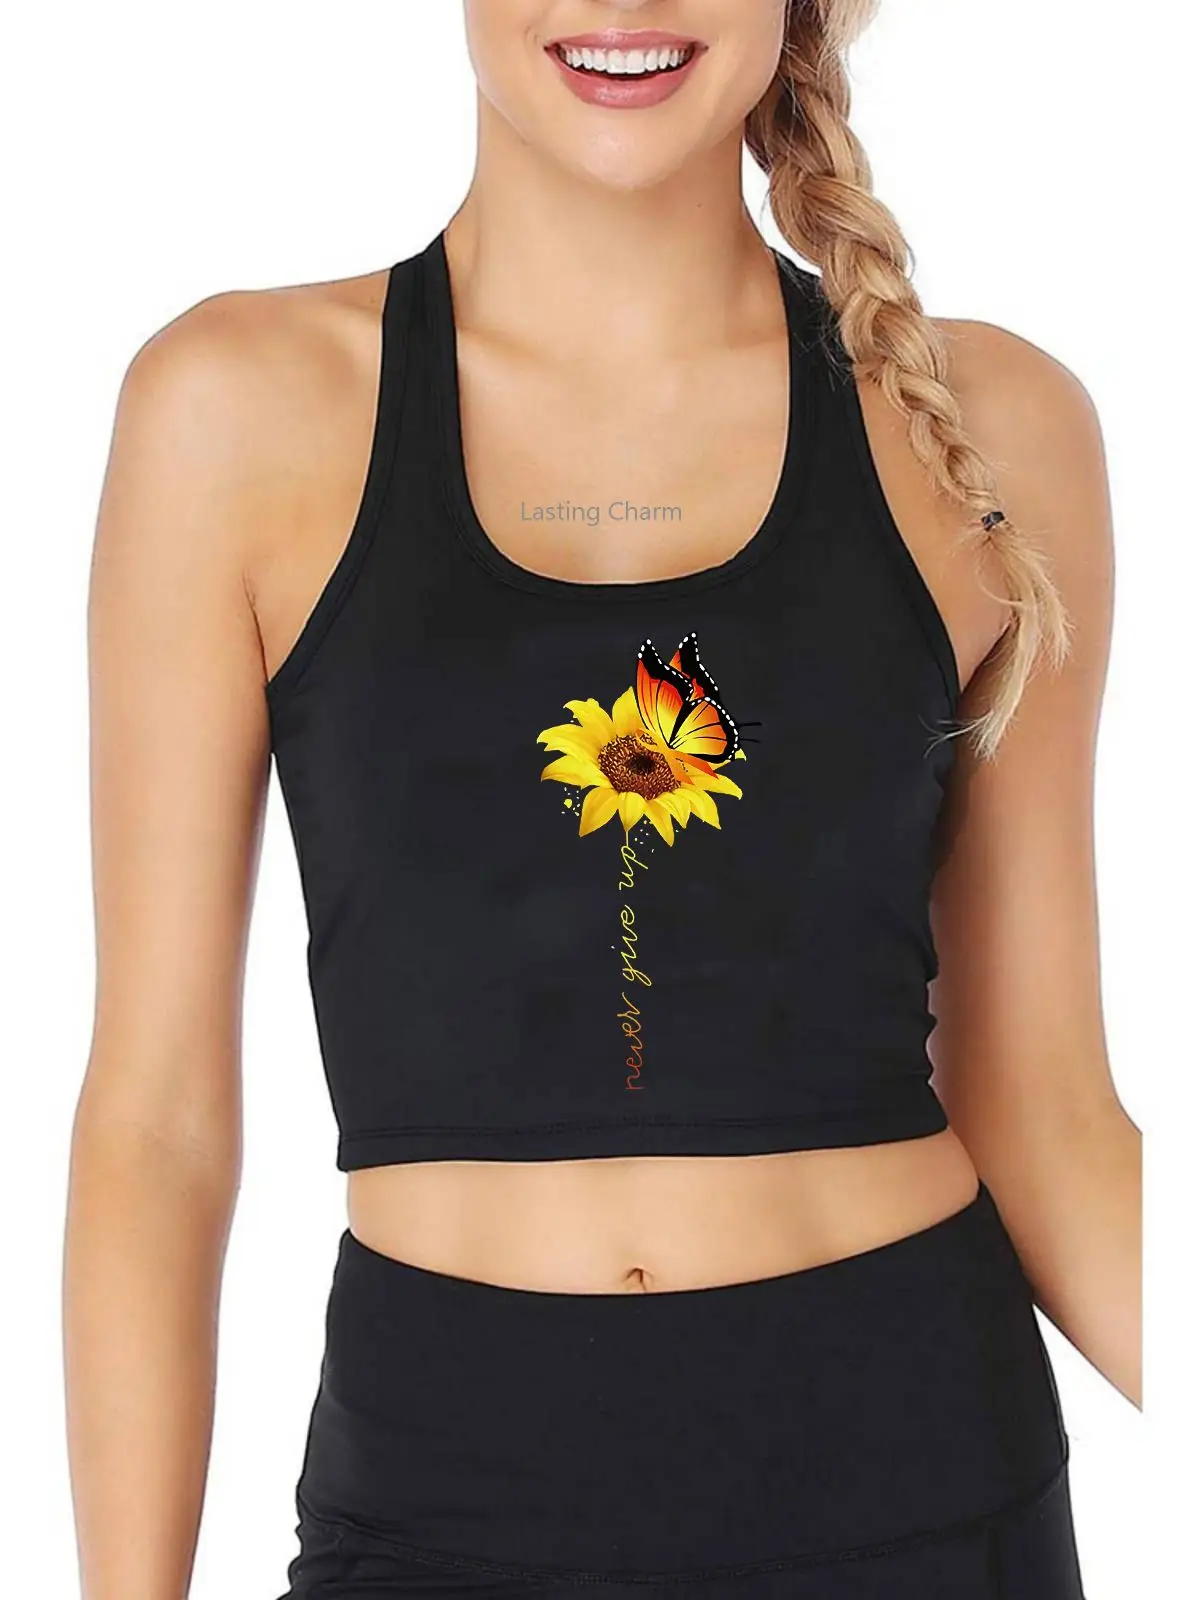 

Butterflies come when they smell the fragrance Never give up motto Print Tank Top Women's Yoga Sports Workout Crop Top